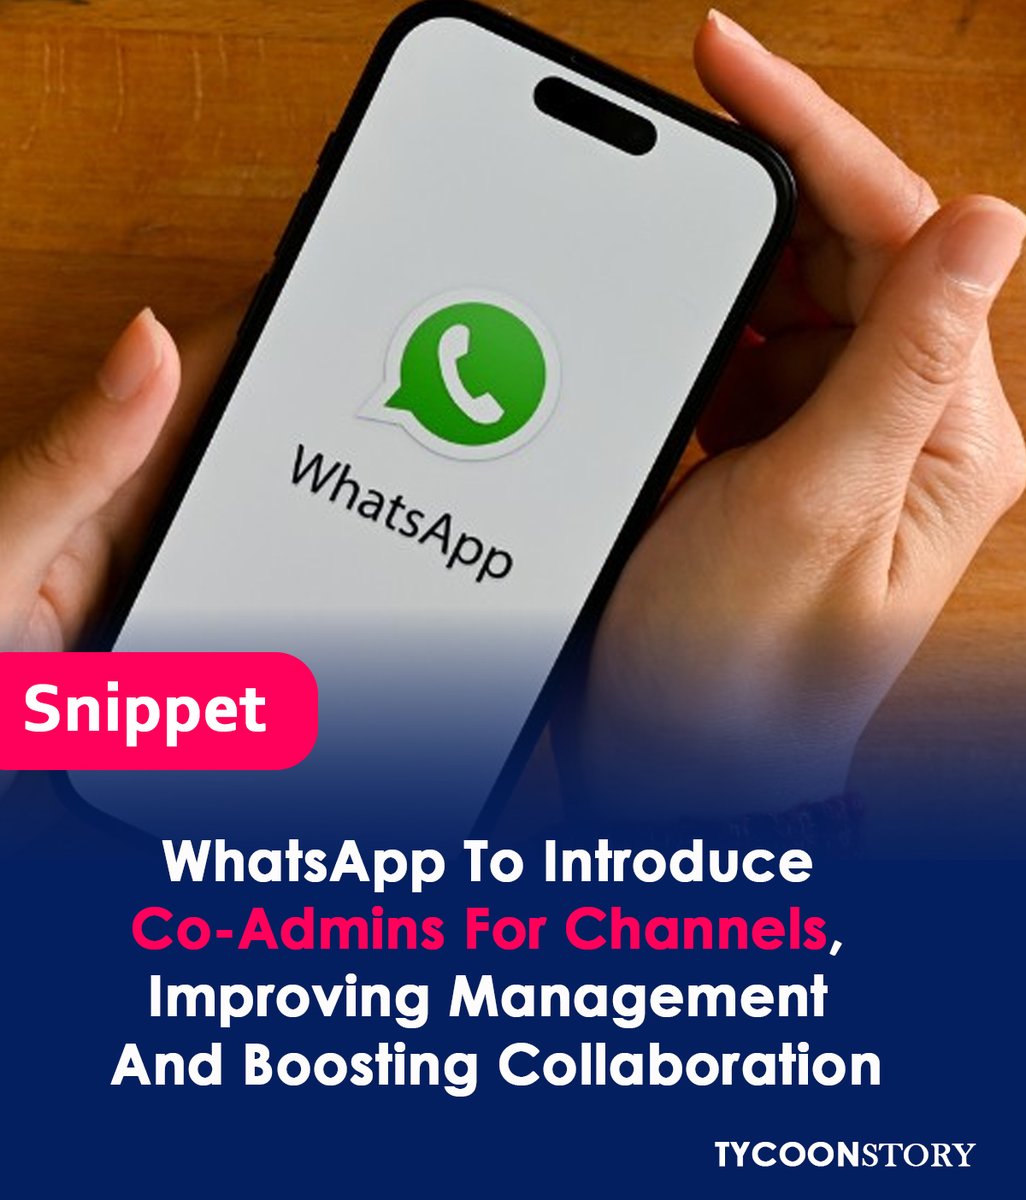 Whatsapp Is Launching A Feature That Will Let Channel Owners Designate Multiple Administrators.
#WhatsAppChannels #MultipleAdmins #WhatsAppUpdates #WhatsAppNews #SocialMedia #TechNews #DigitalMarketing #Moderation #CommunityManagement #Collaboration #Efficiency #Growth @WhatsApp